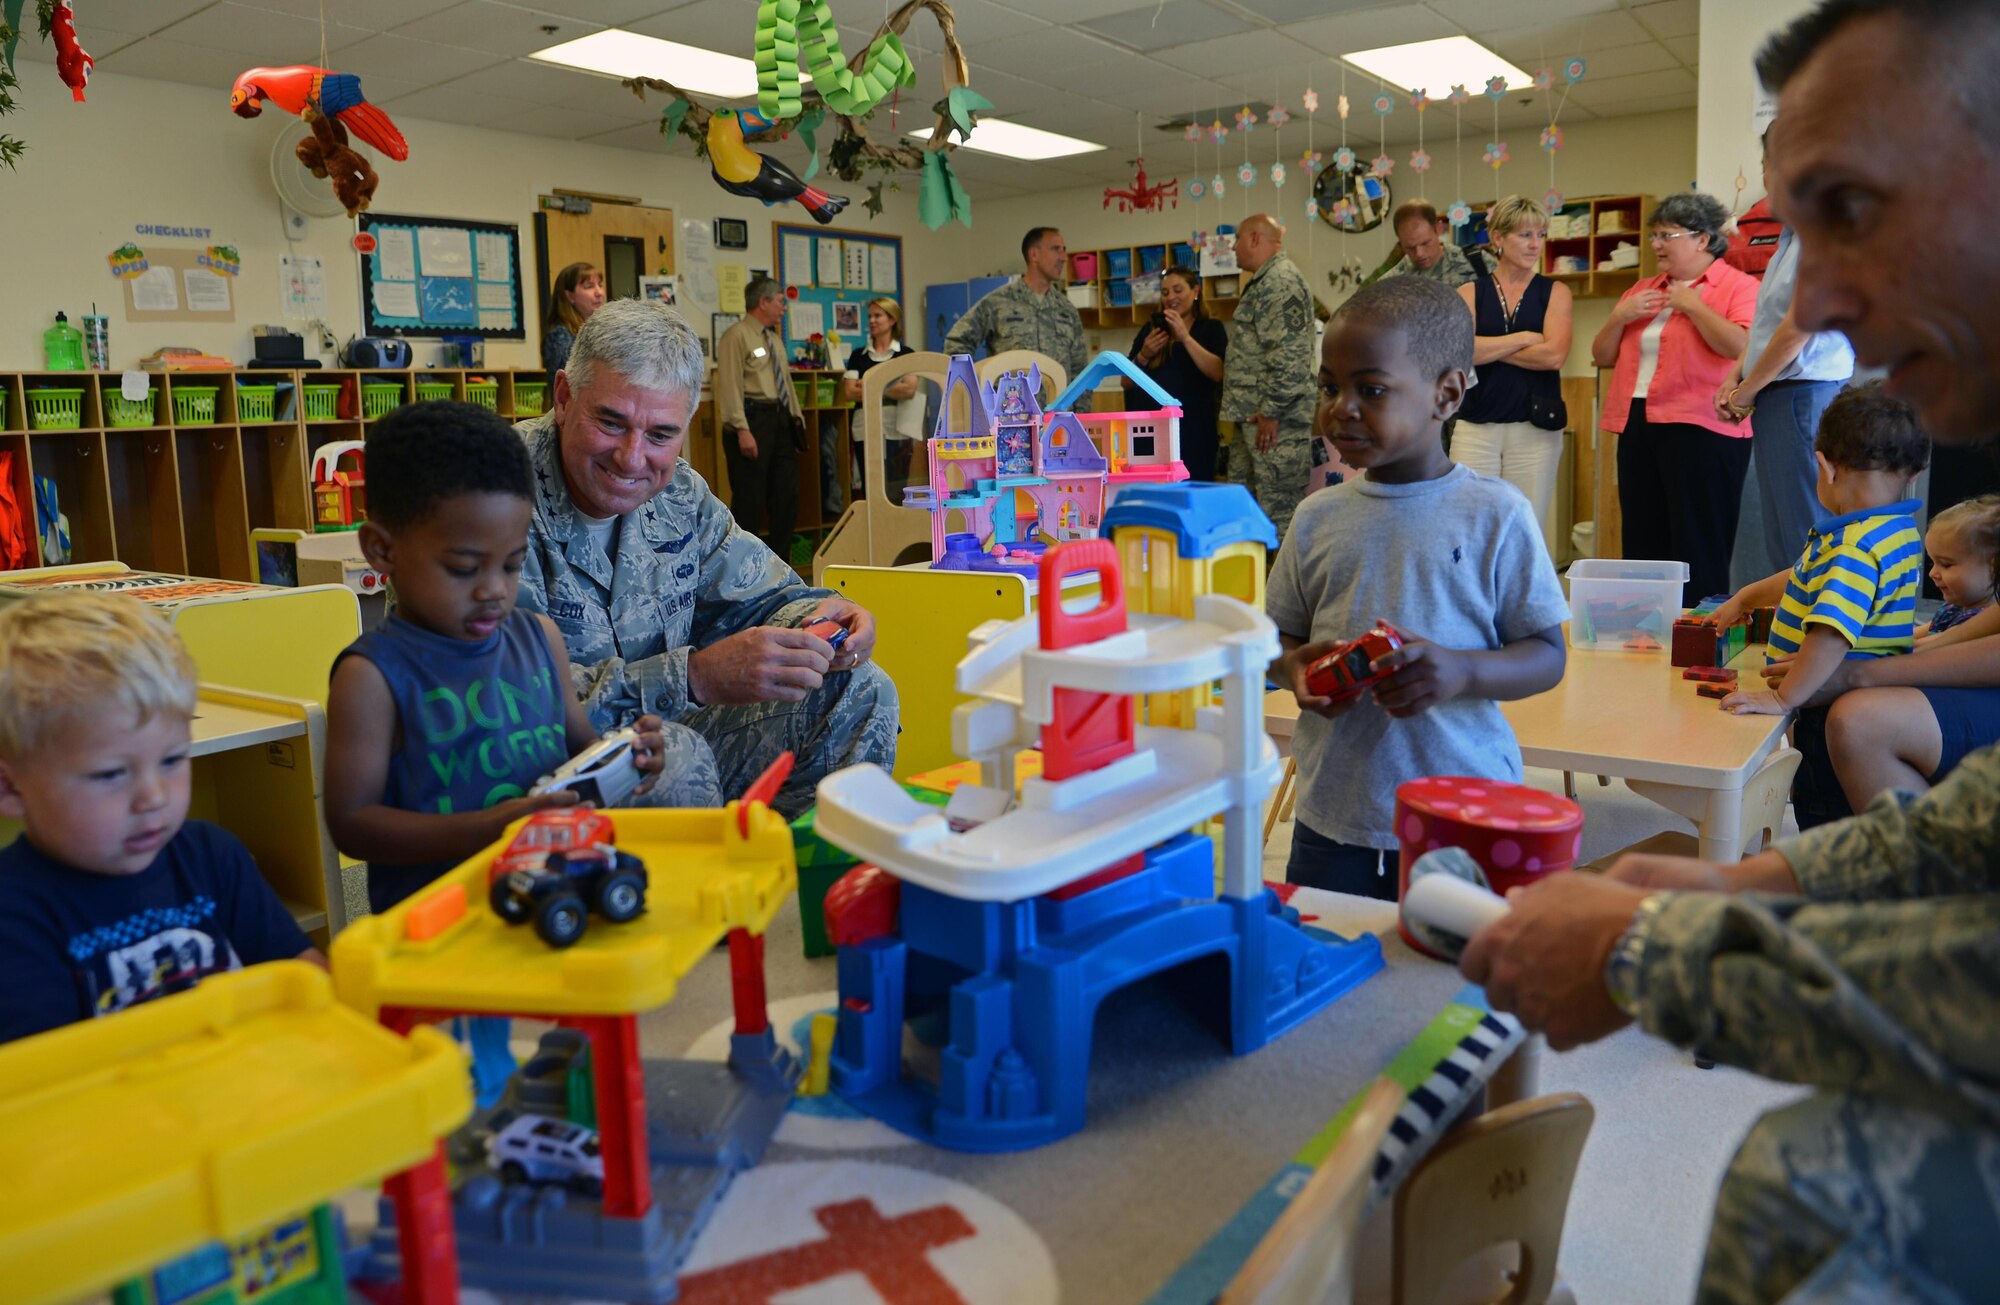 Lt. Gen. Sam Cox (left), 18th Air Force commander, and Chief Master Todd Petzel, 18th Air Force command chief, interact with children at the McChord Child Development Center Aug. 18, 2016, at Joint Base Lewis-McChord, Wash. Cox visited the CDC to learn more about the joint base led facility and to inform the staff of how valuable they are. The men and women who work at the CDC take care of our families, which significantly impacts the misison. (U.S. Air Force photo/Senior Airman Jacob Jimenez)  